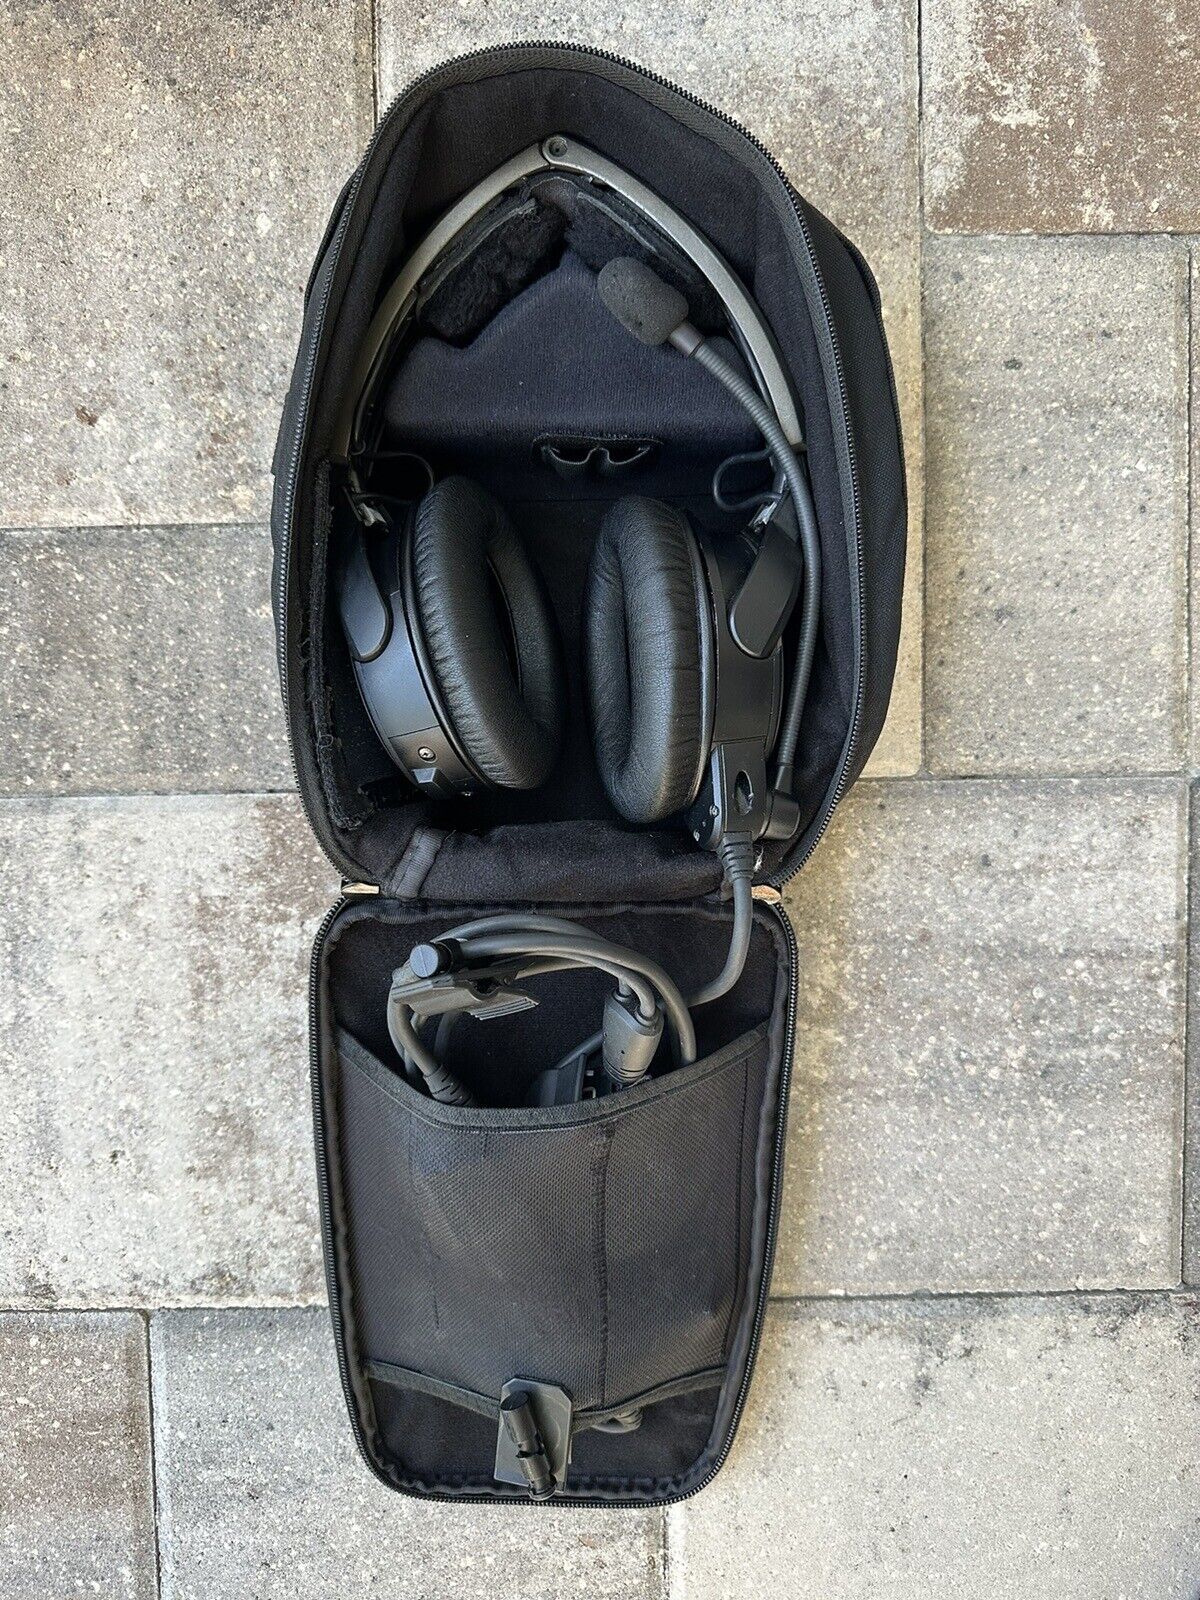 Used- Bose A20 Aviation Headset with Dual Cable plus Case